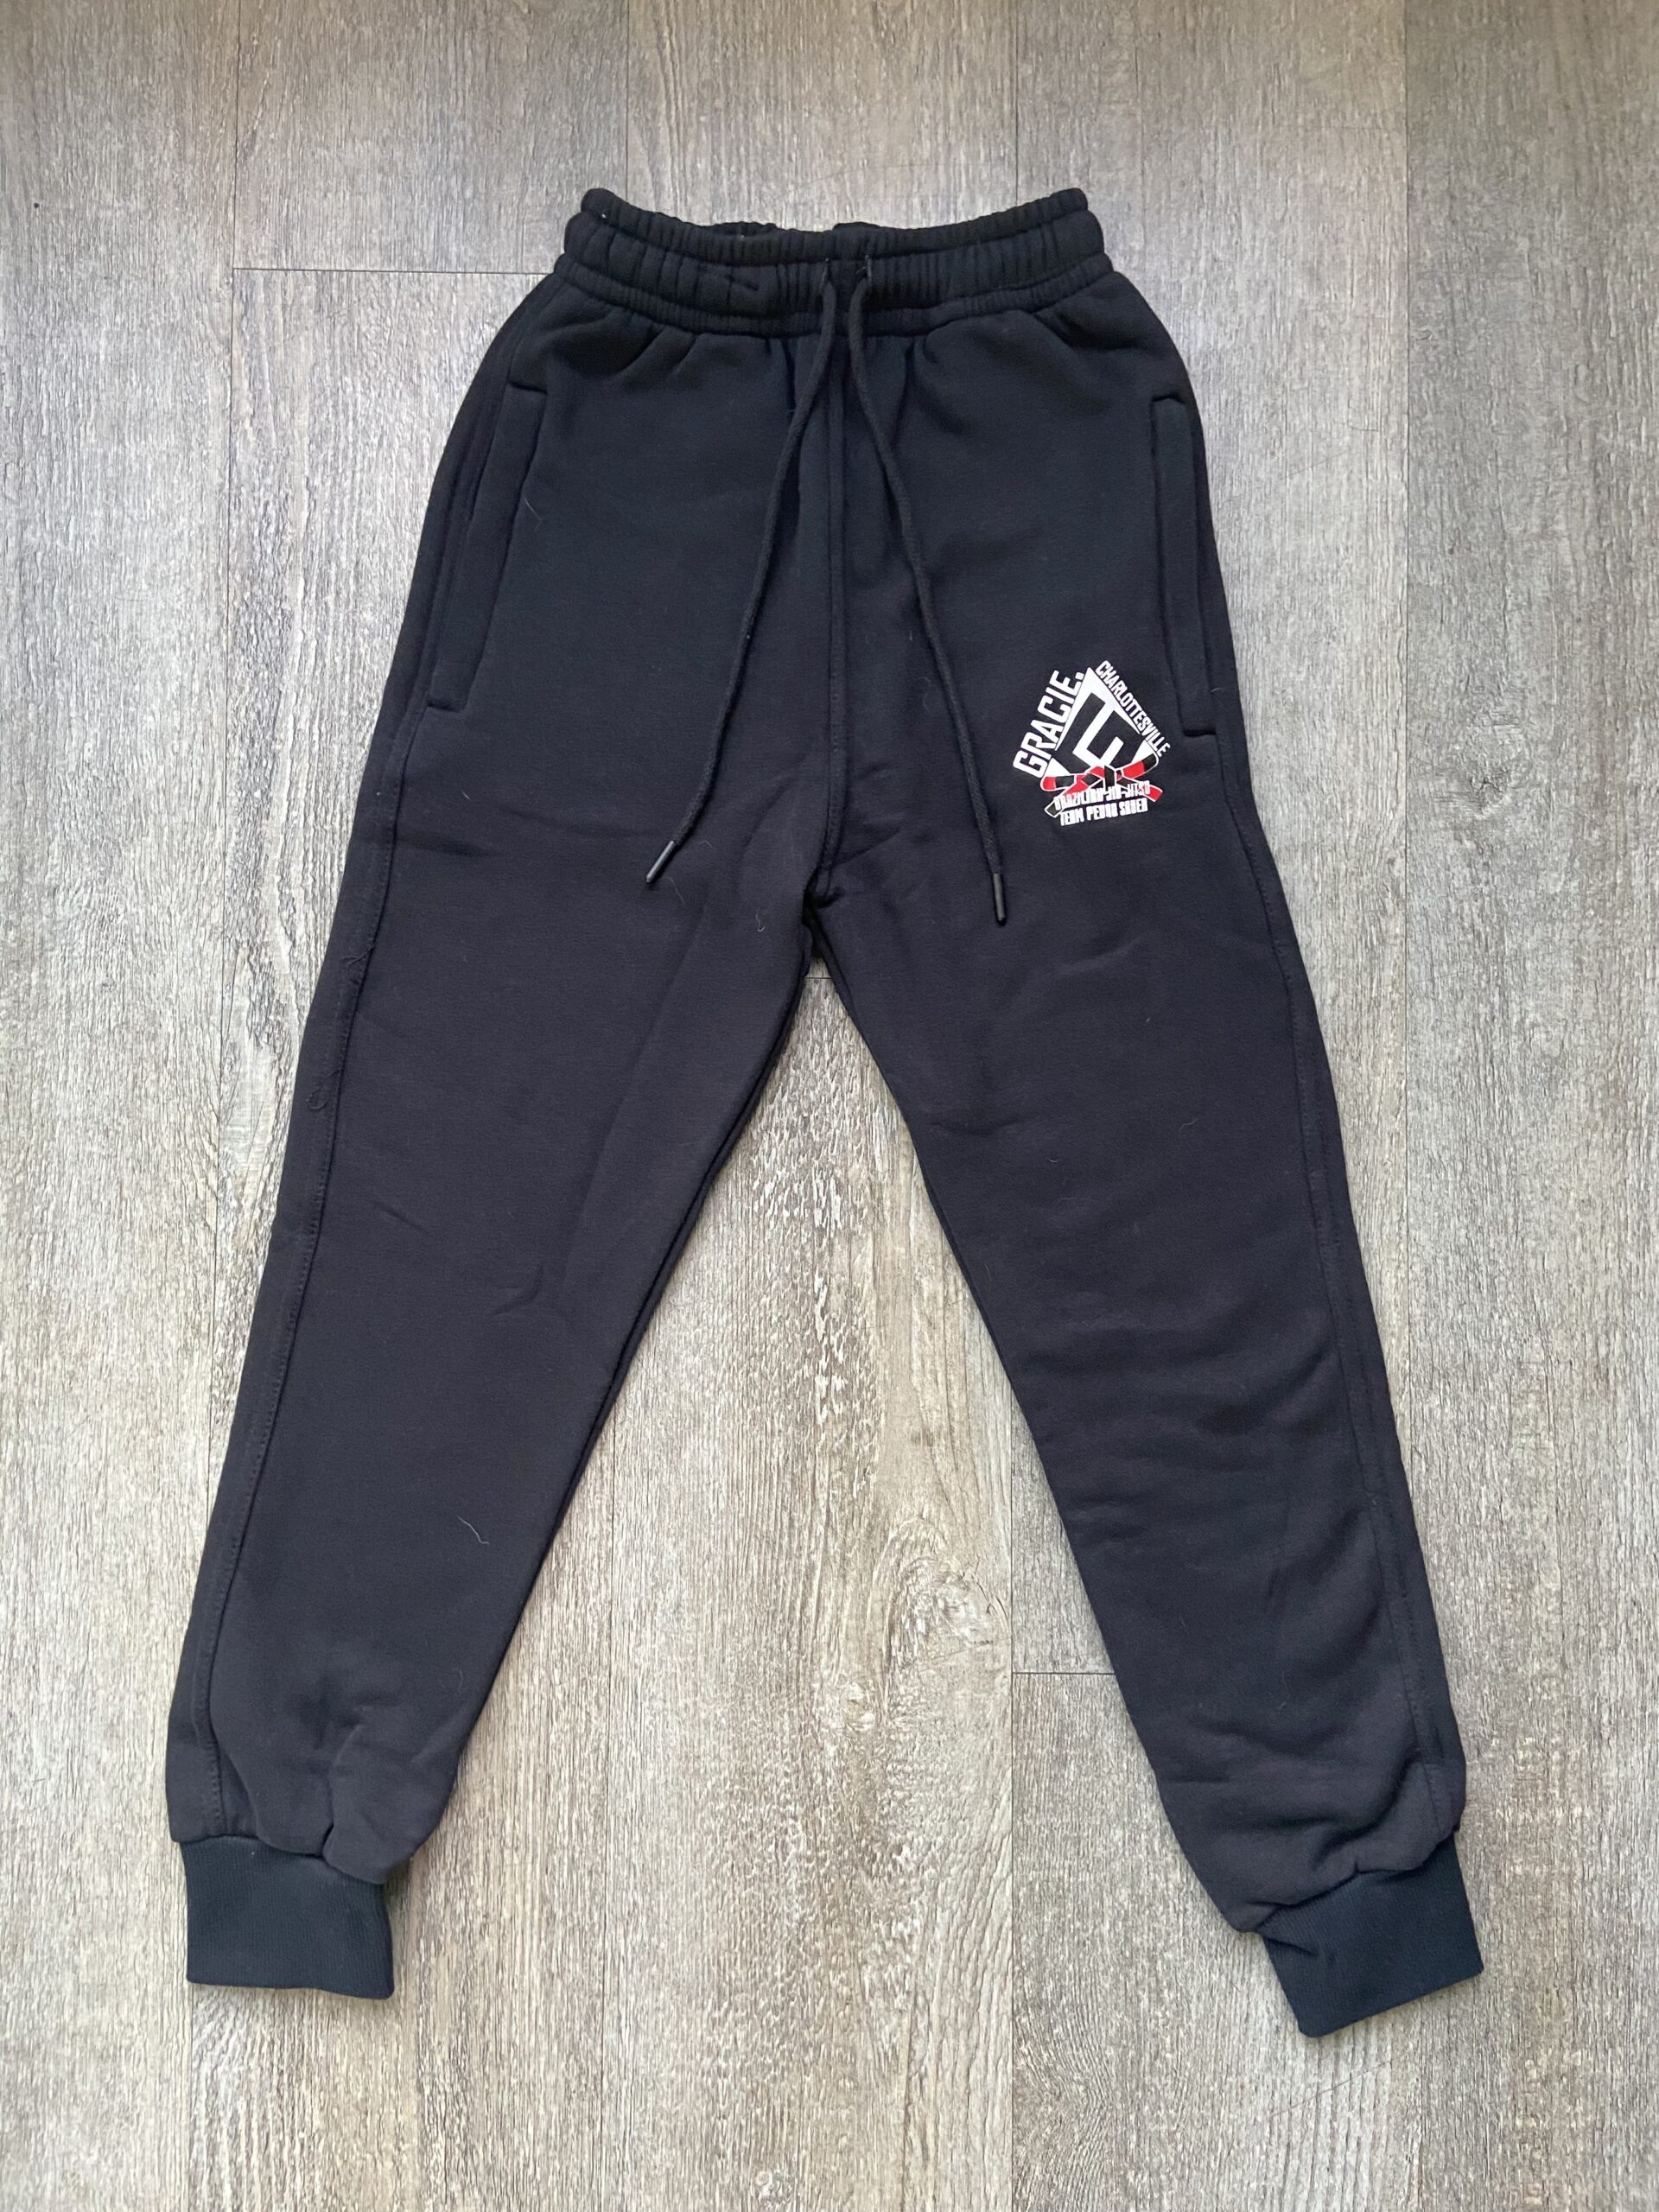 Gracie Charlottesville Hoodie and Sweatpants Set (Youth & Adult)